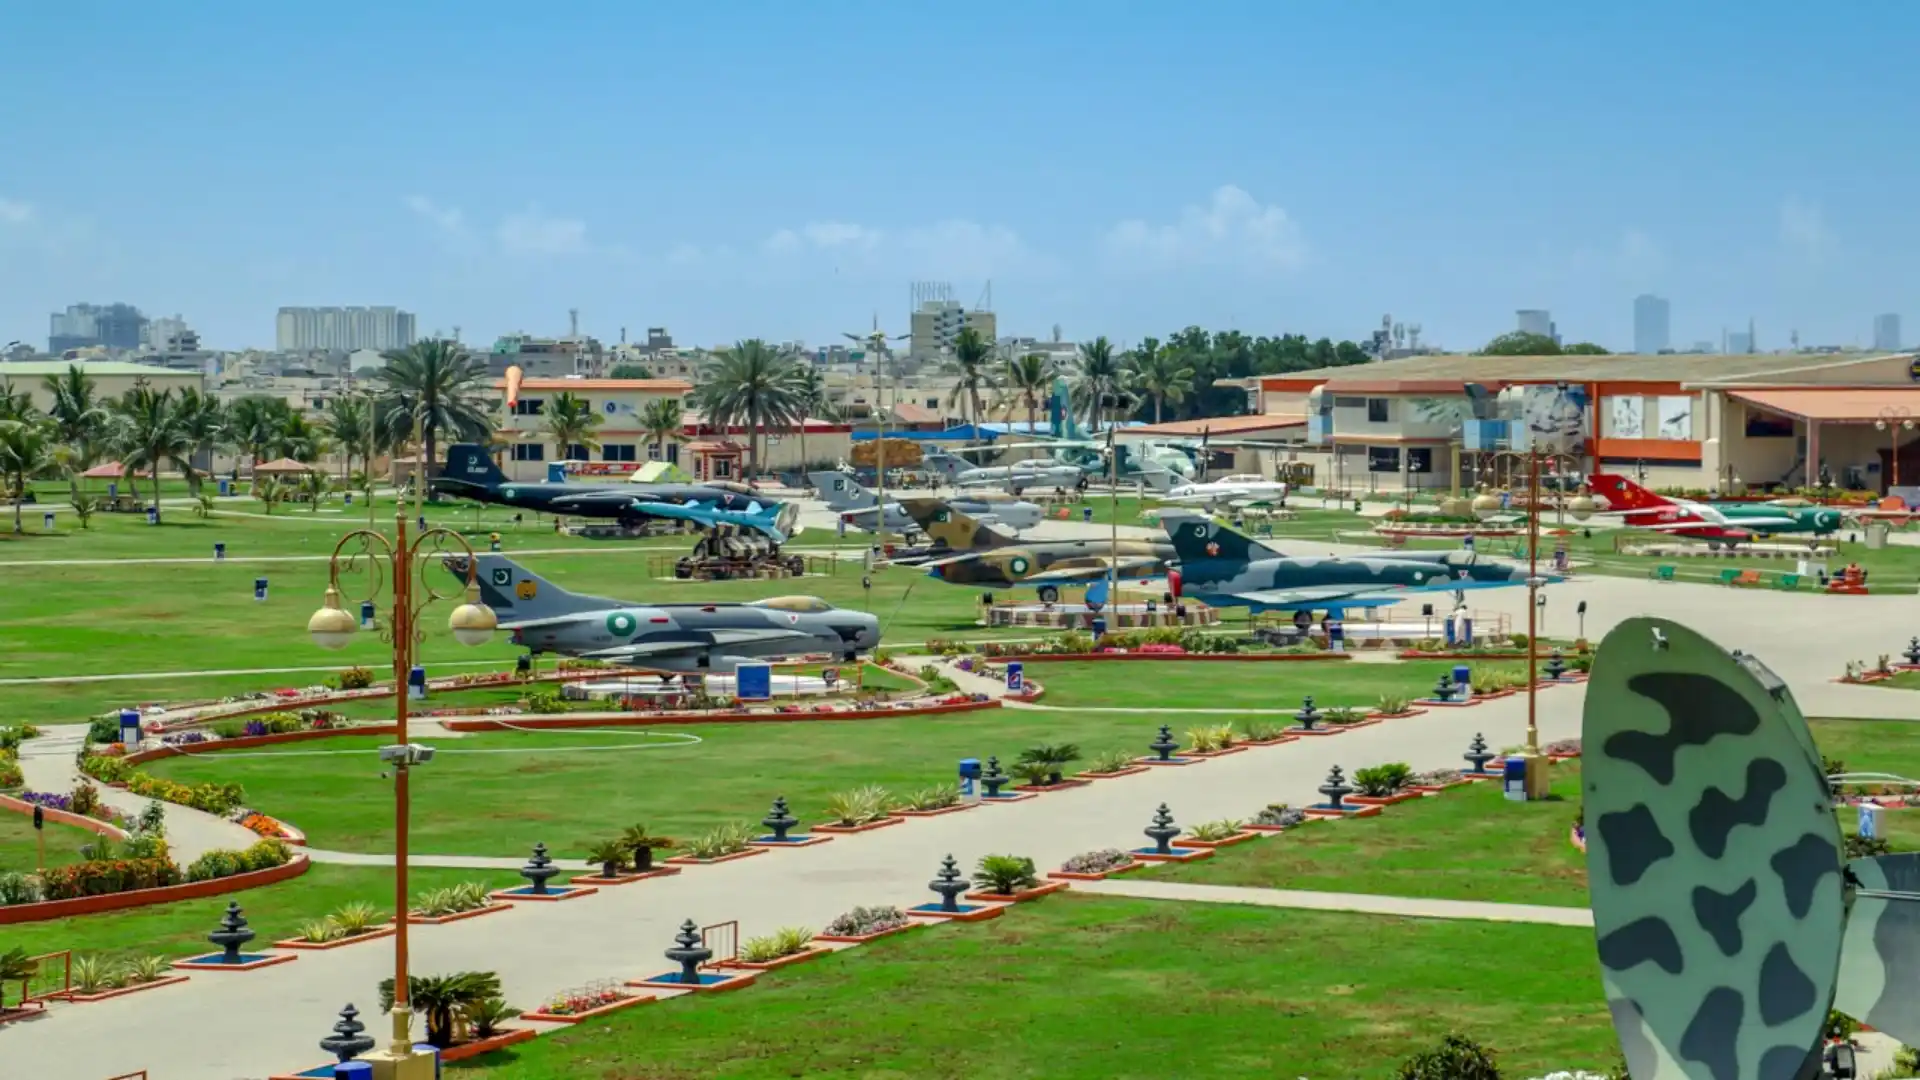 About PAF museum